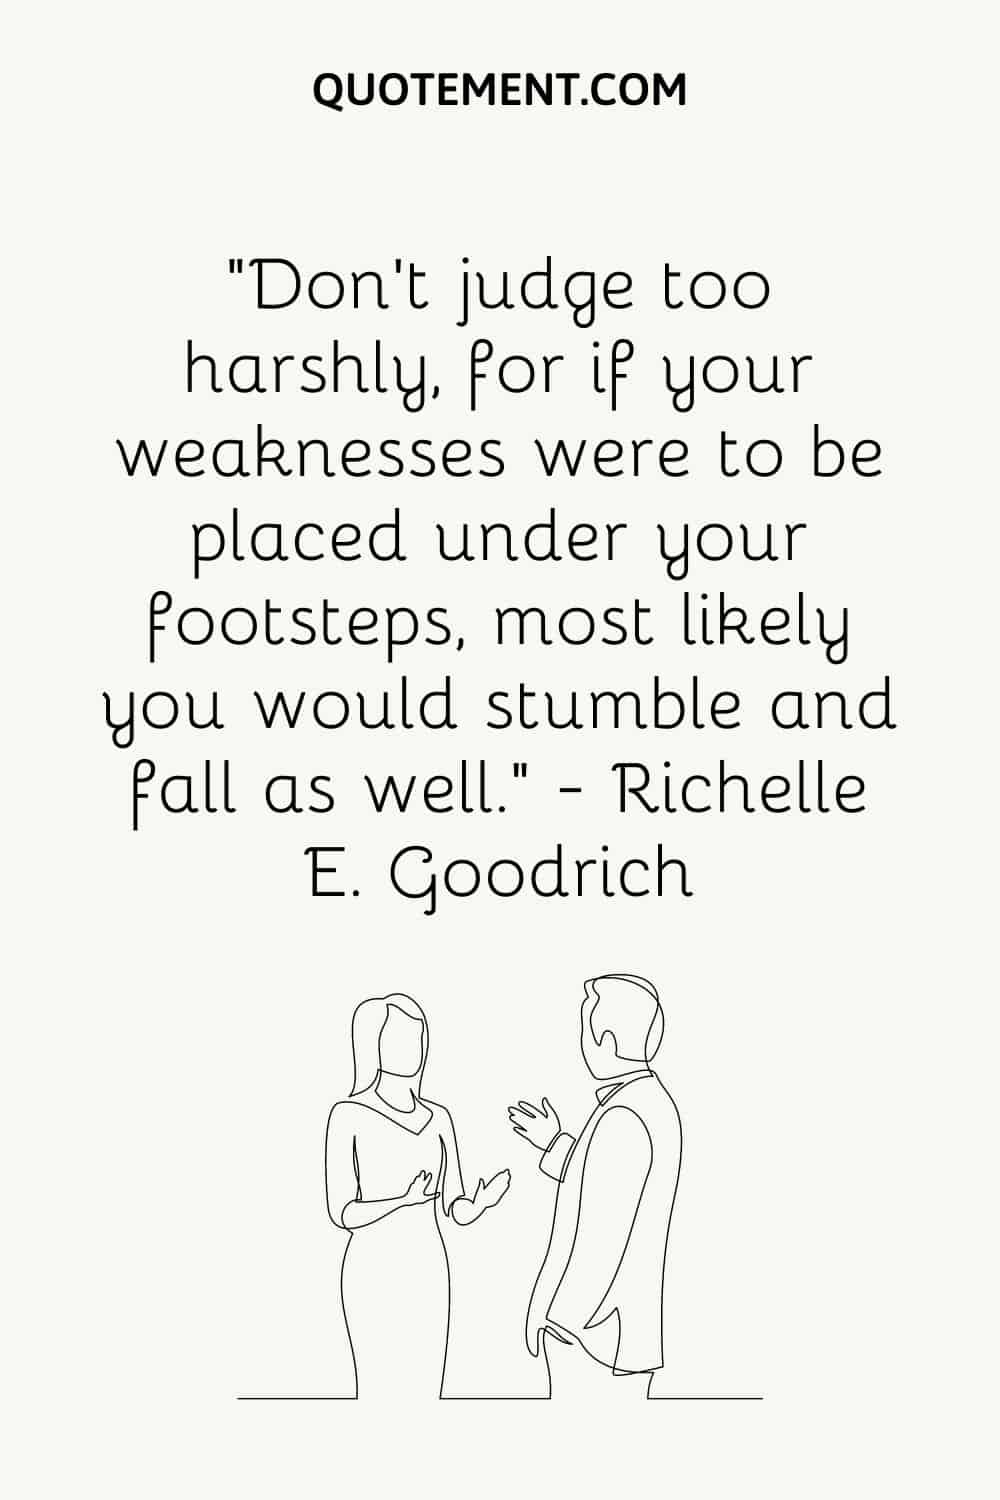 “Don’t judge too harshly, for if your weaknesses were to be placed under your footsteps, most likely you would stumble and fall as well.” — Richelle E. Goodrich